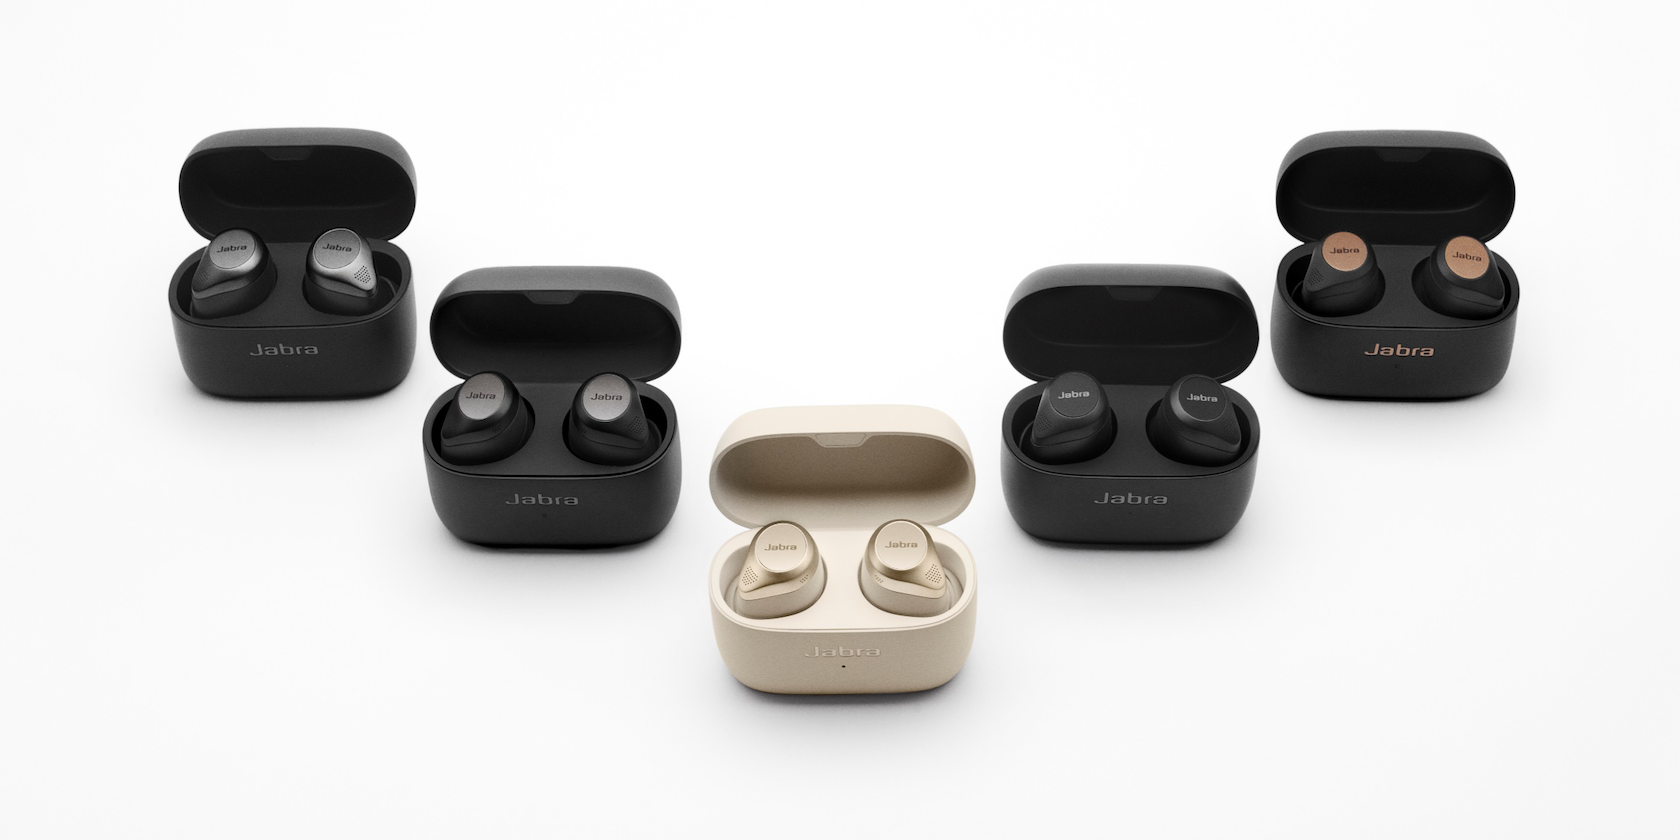 The Jabra Elite 85t ANC Earbuds Are Now Available in Four New Colors